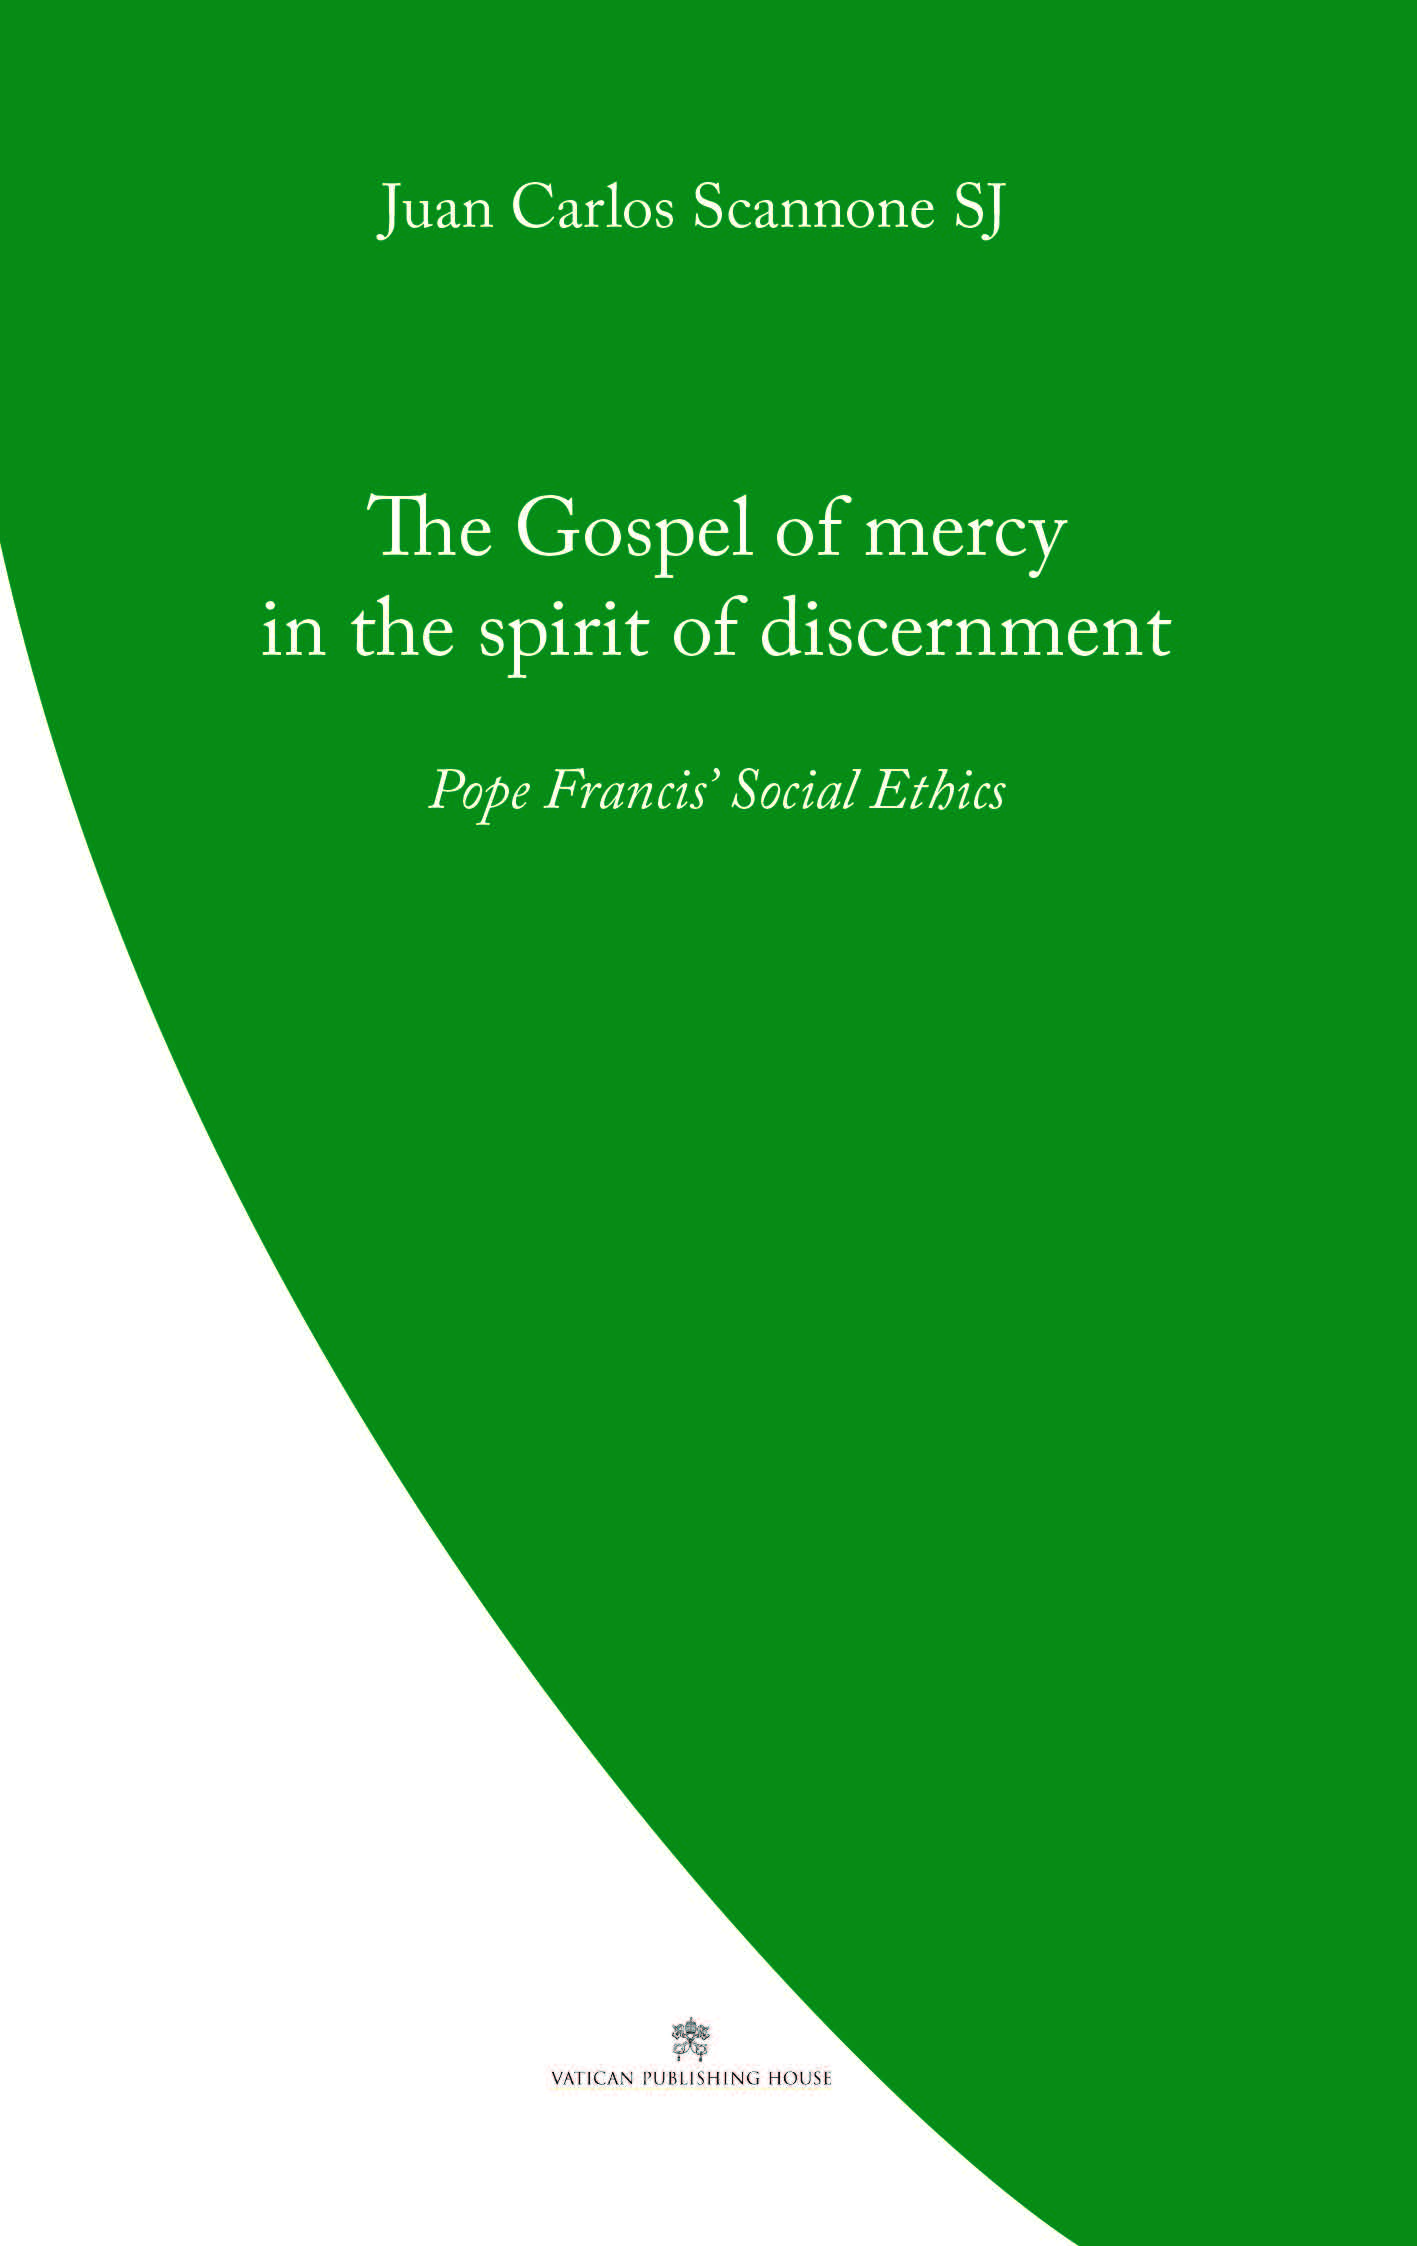 The Gospel of Mercy in the Spirit of Discernment   Pope Francis' Social Ethics / Juan Carlos Scannone SJ